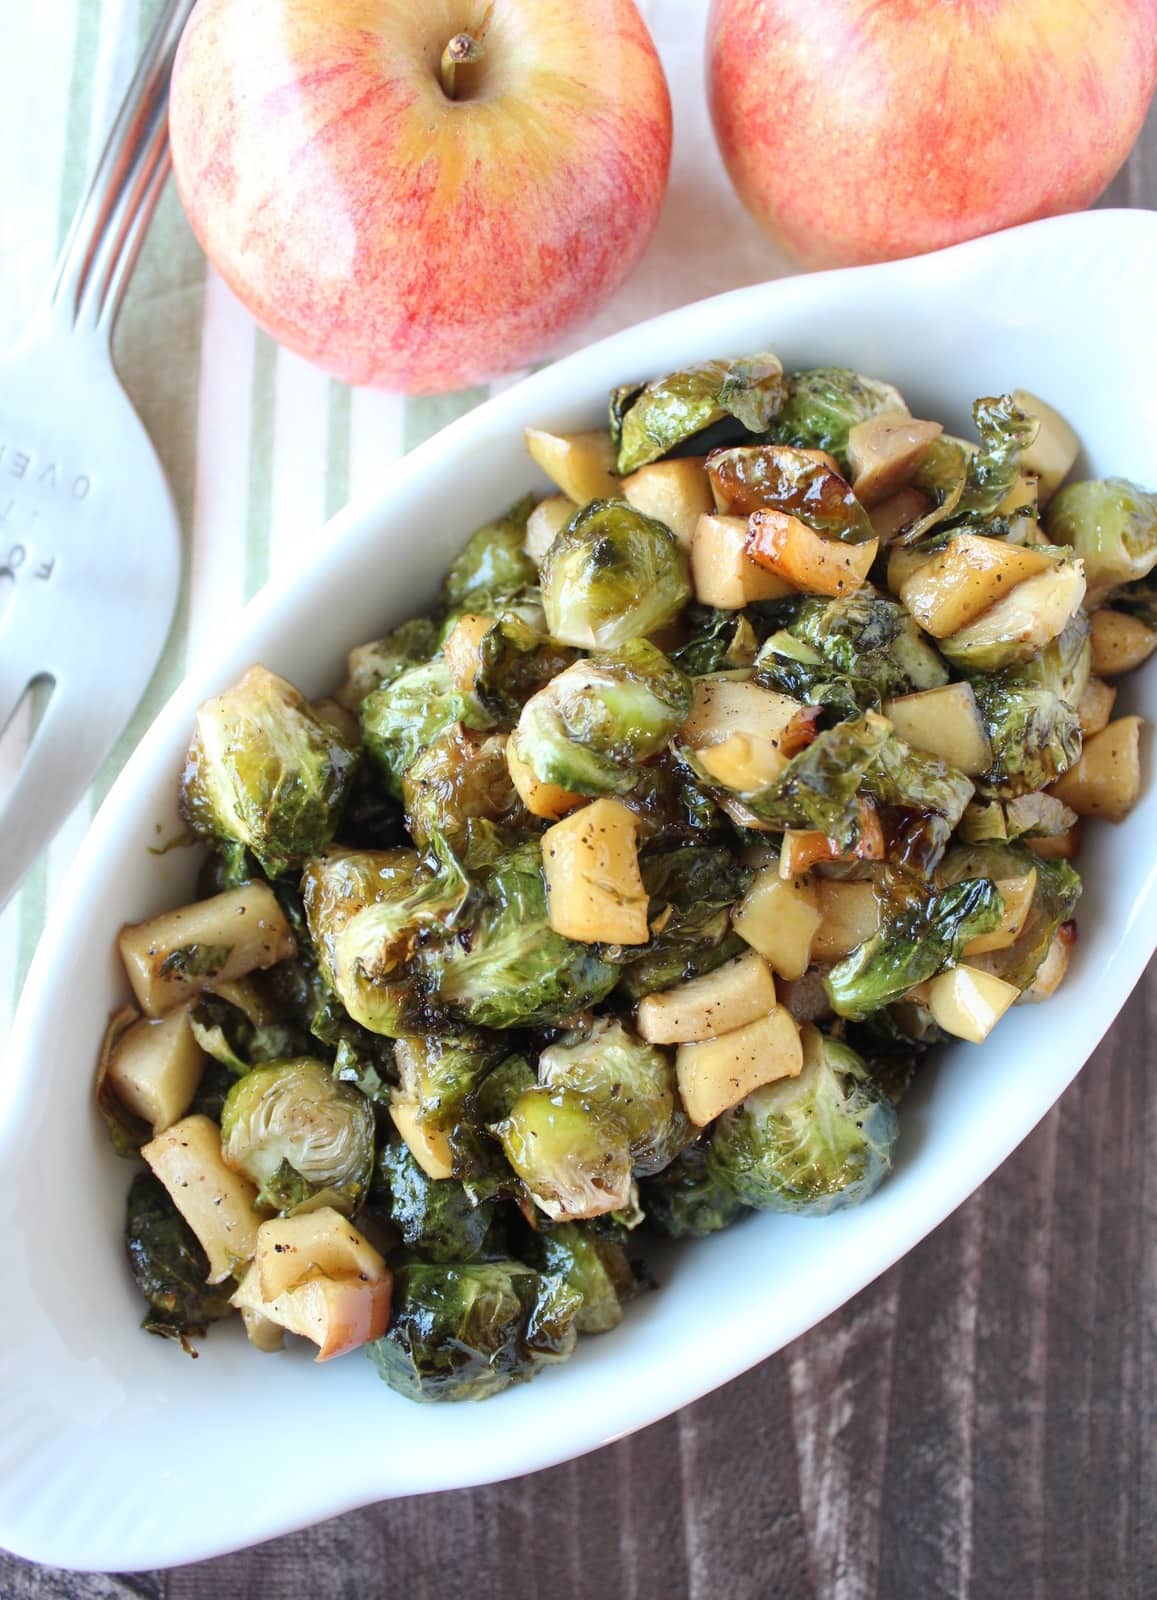 roasted brussels sprouts and diced apples in serving dish